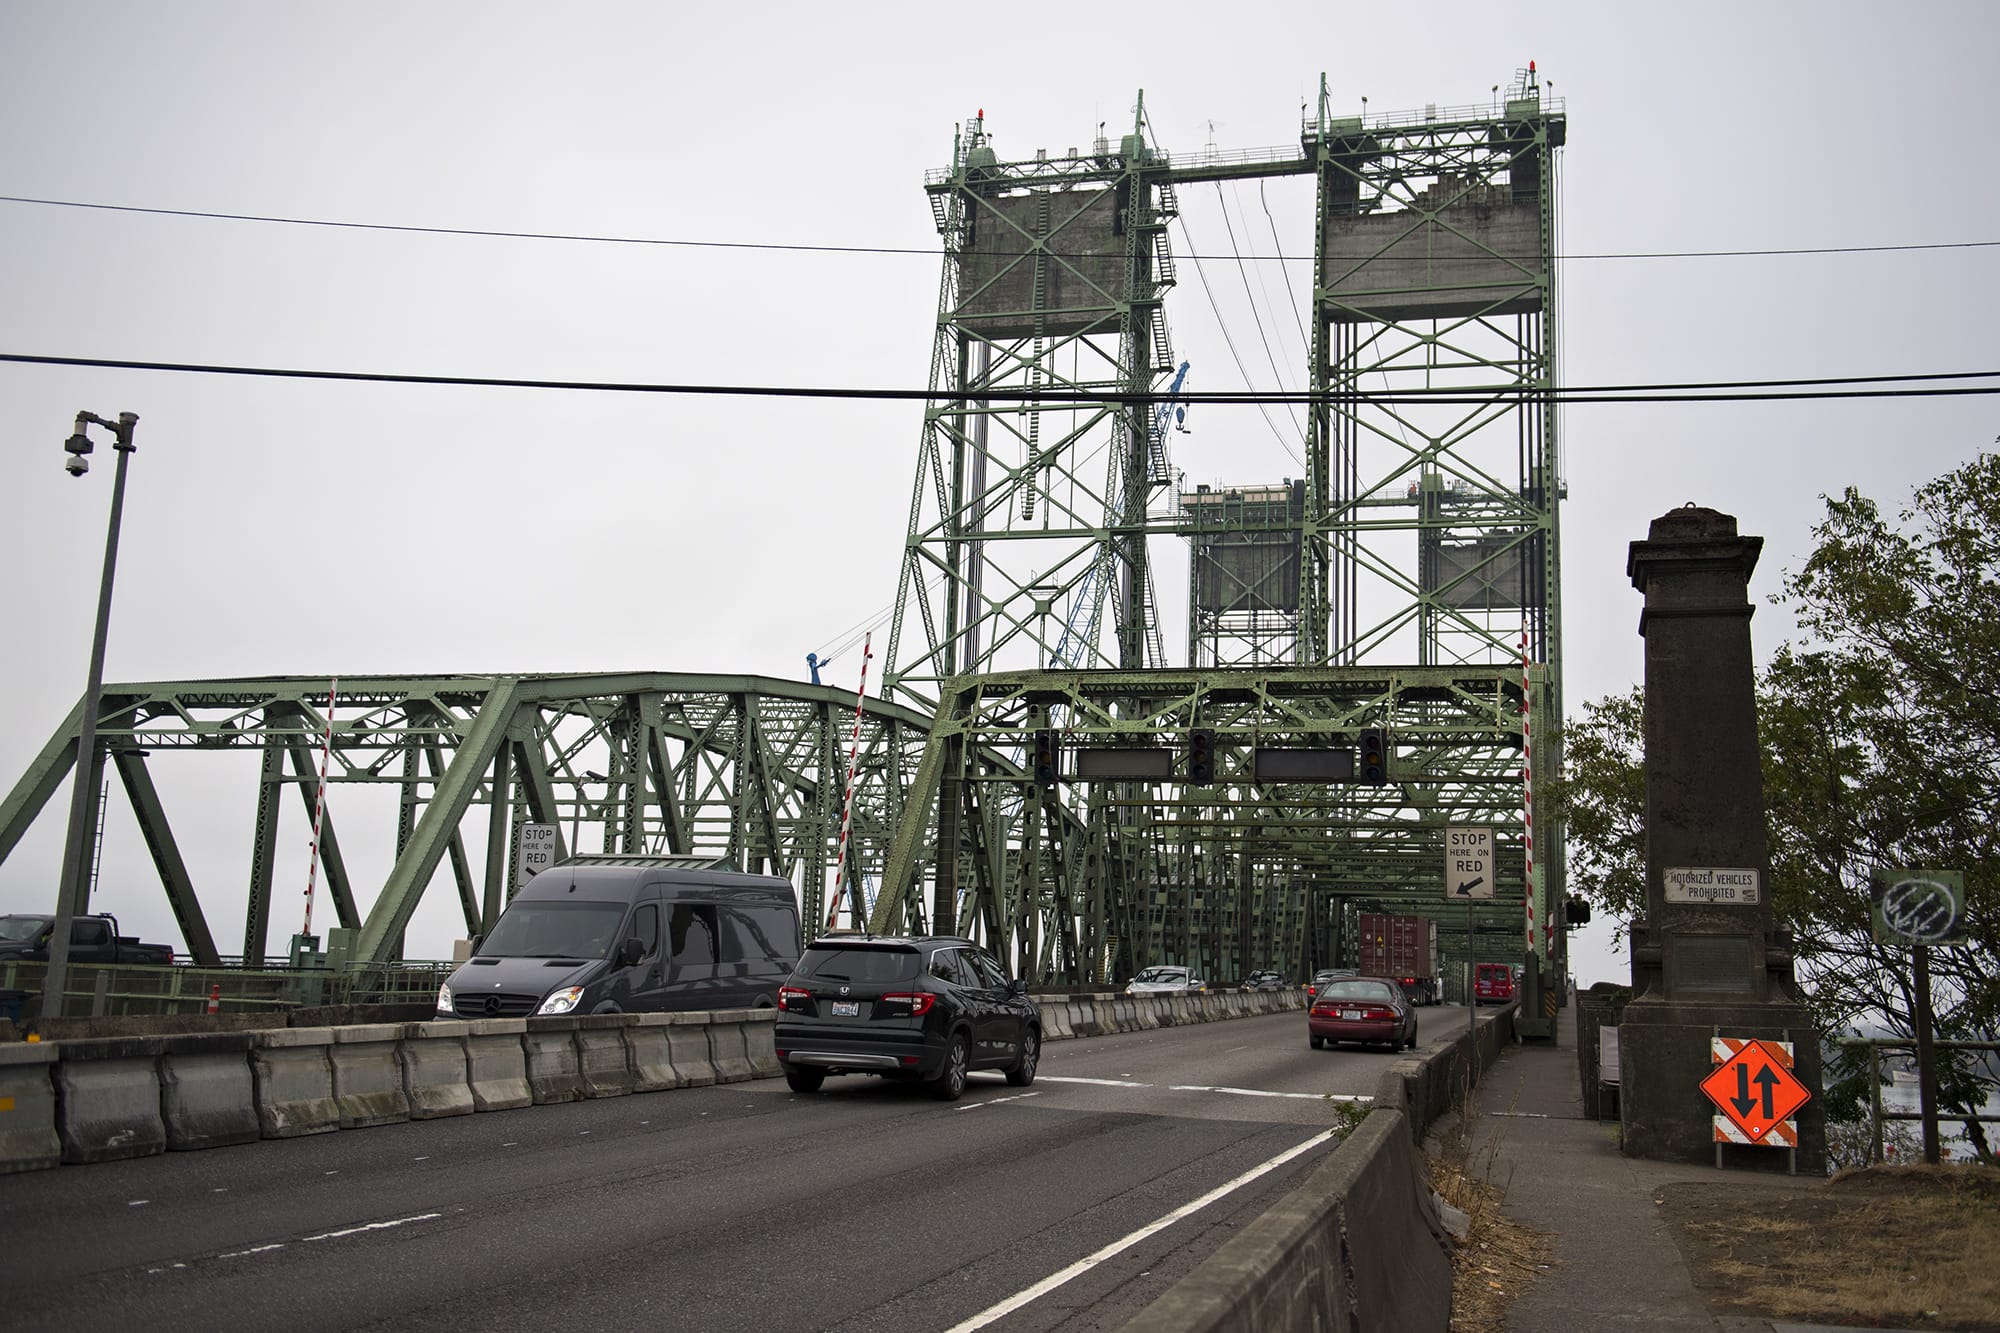 Traffic flows smoothly in both directions in the western section of the Interstate Bridge on Monday morning, Sept. 21, 2020. The northbound lanes in the eastern section of the bridge were closed because of a trunnion replacement project.